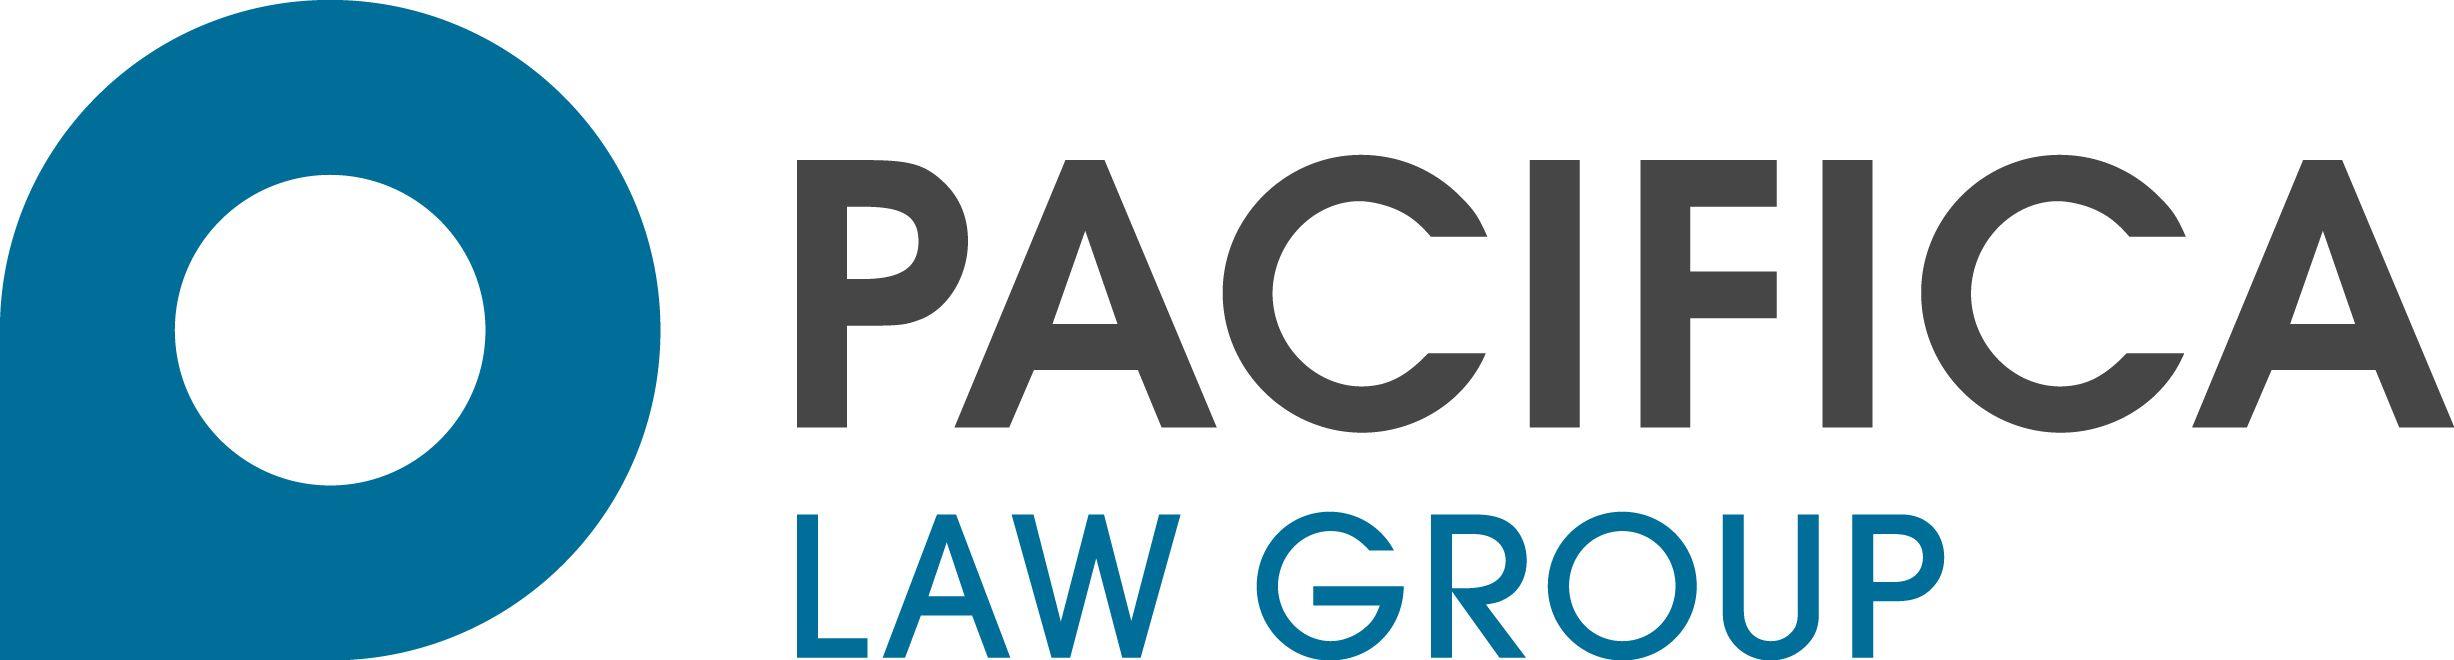 Pacifica Logo - Logo Pacifica Law Group